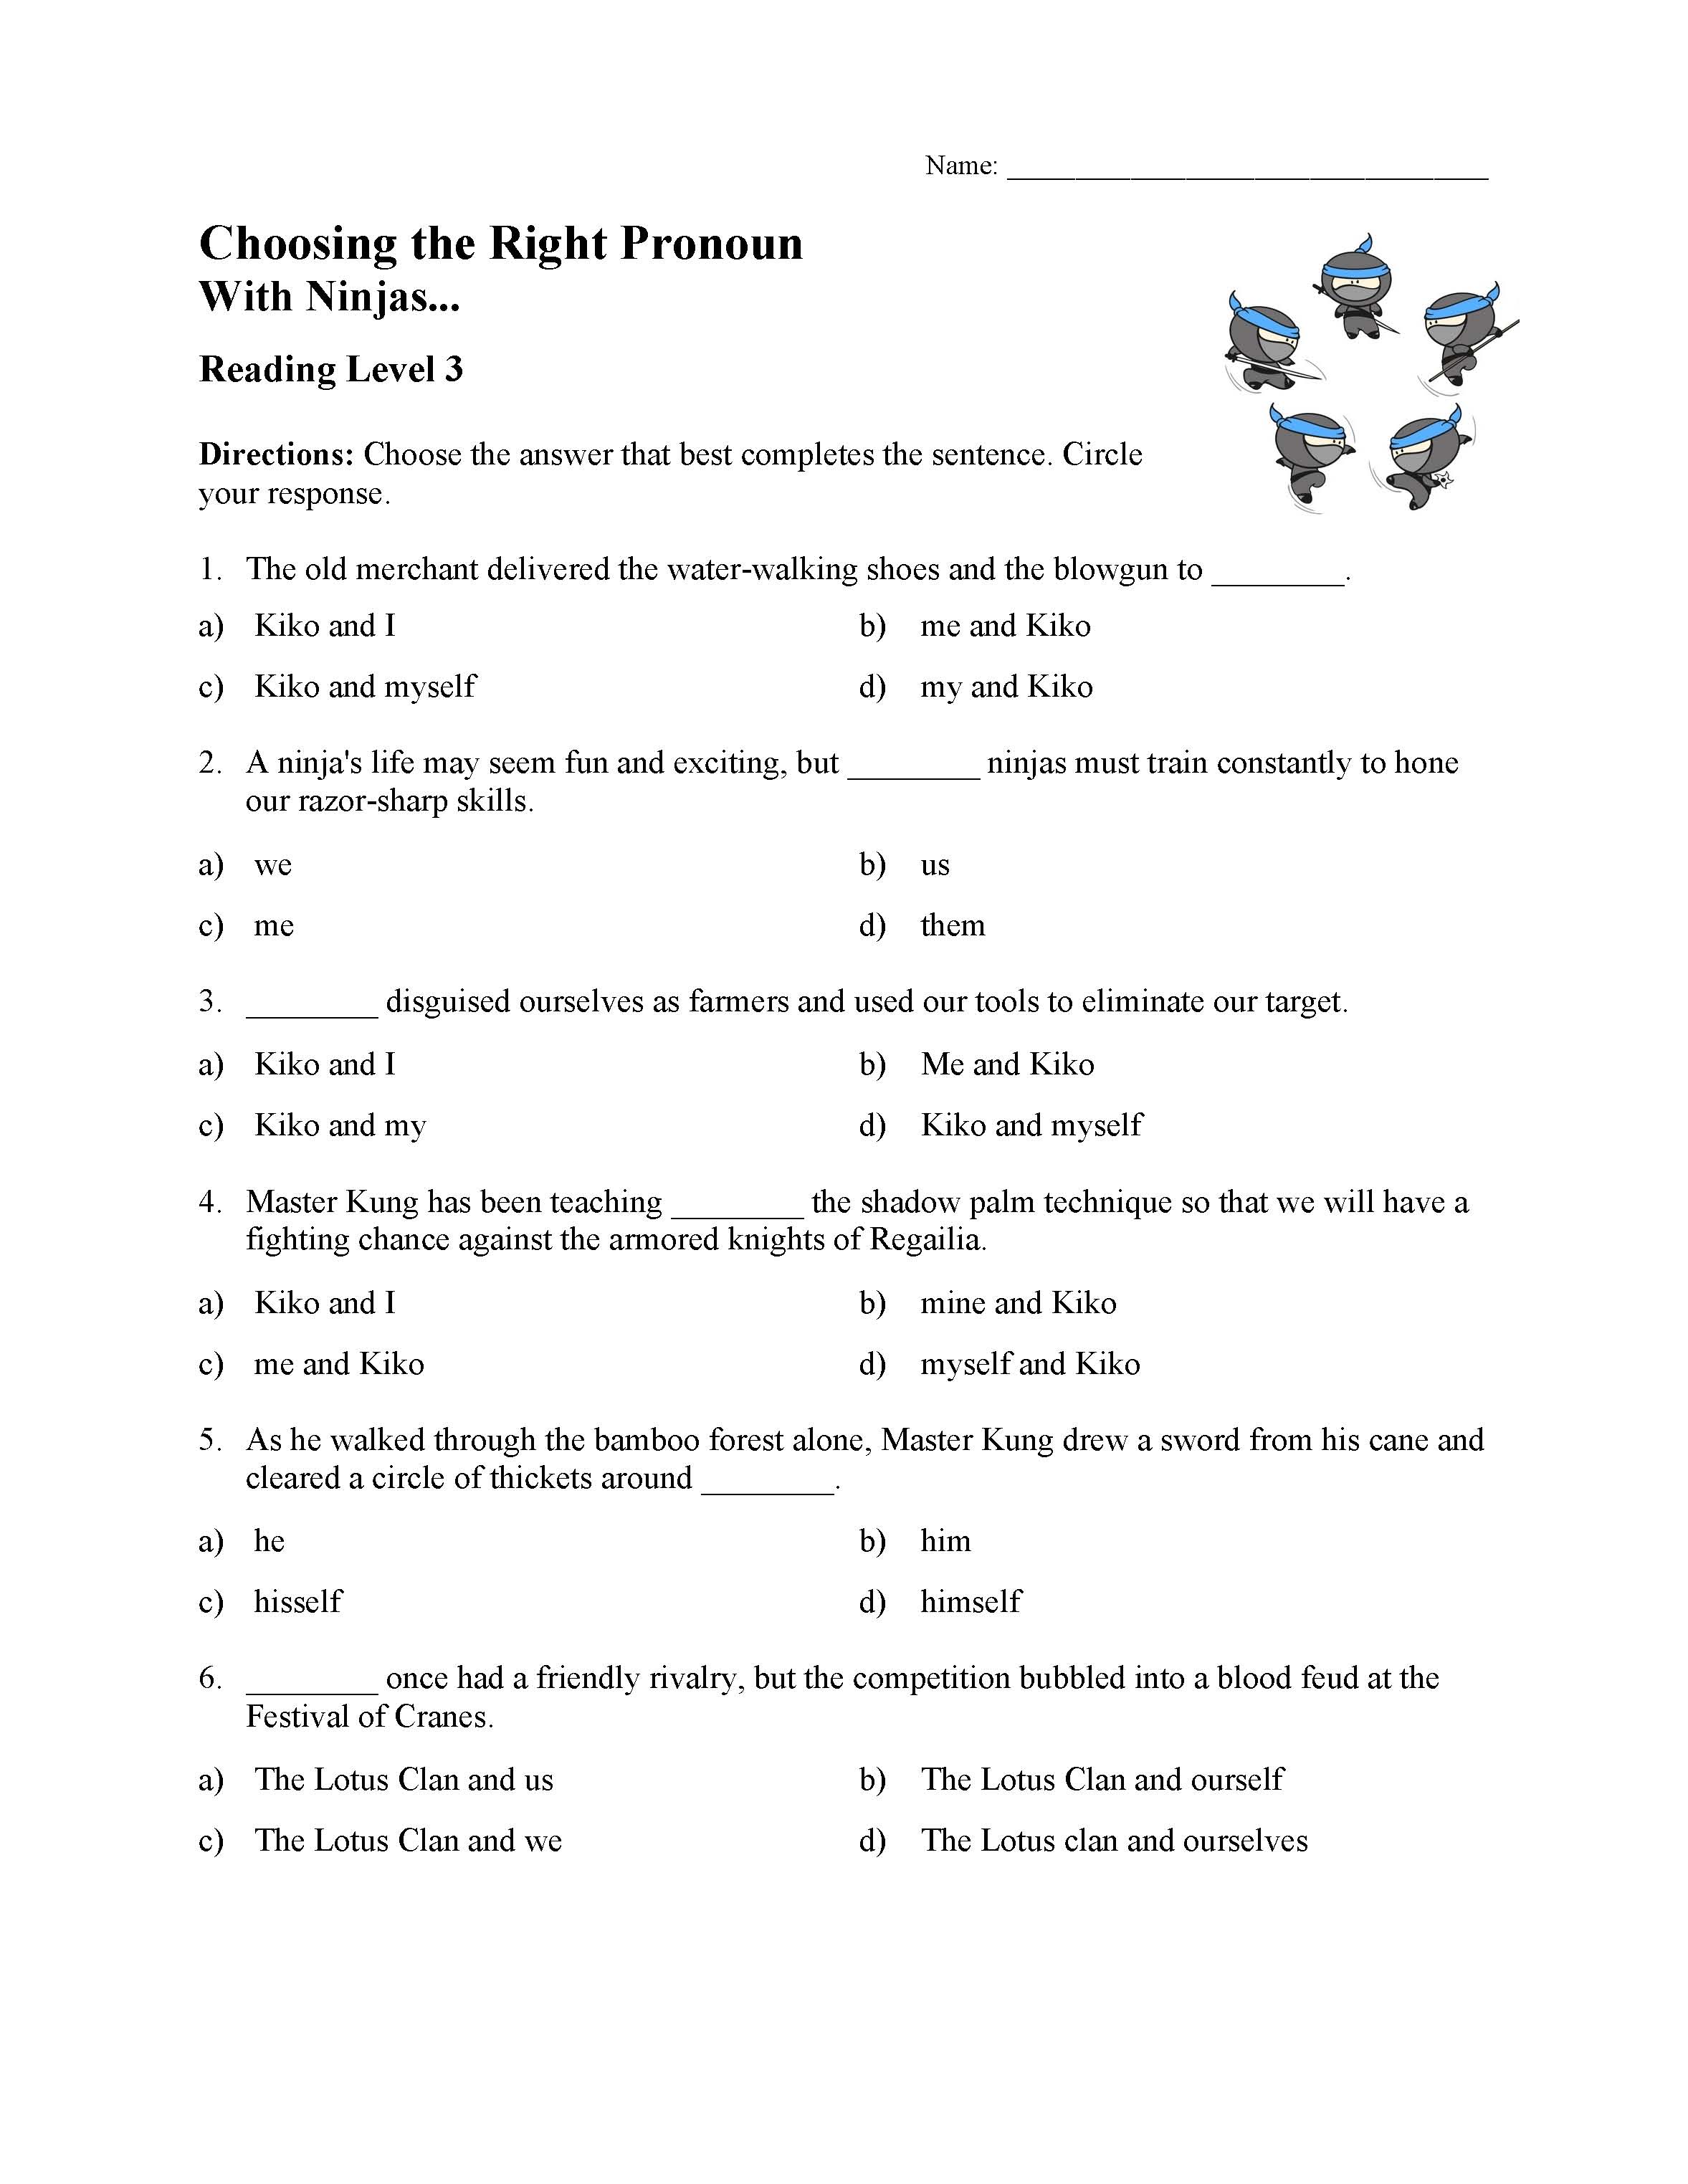 This is a preview image of the Choosing the Correct Pronoun Test with Ninjas - Reading Level 3.